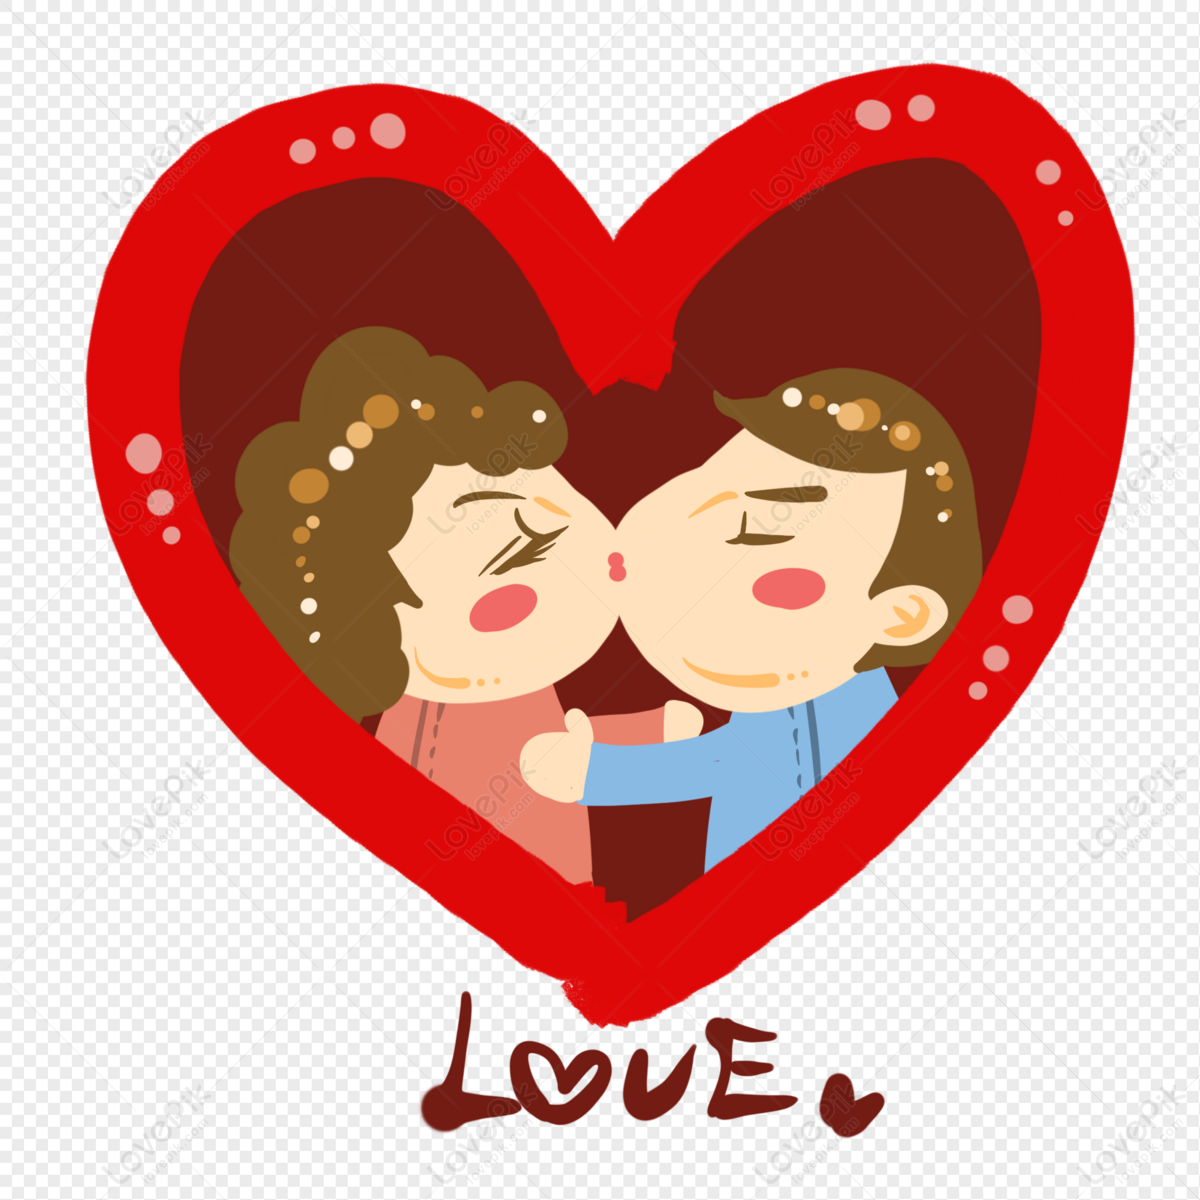 Valentines Day Couple Kissing PNG Image Free Download And Clipart ...